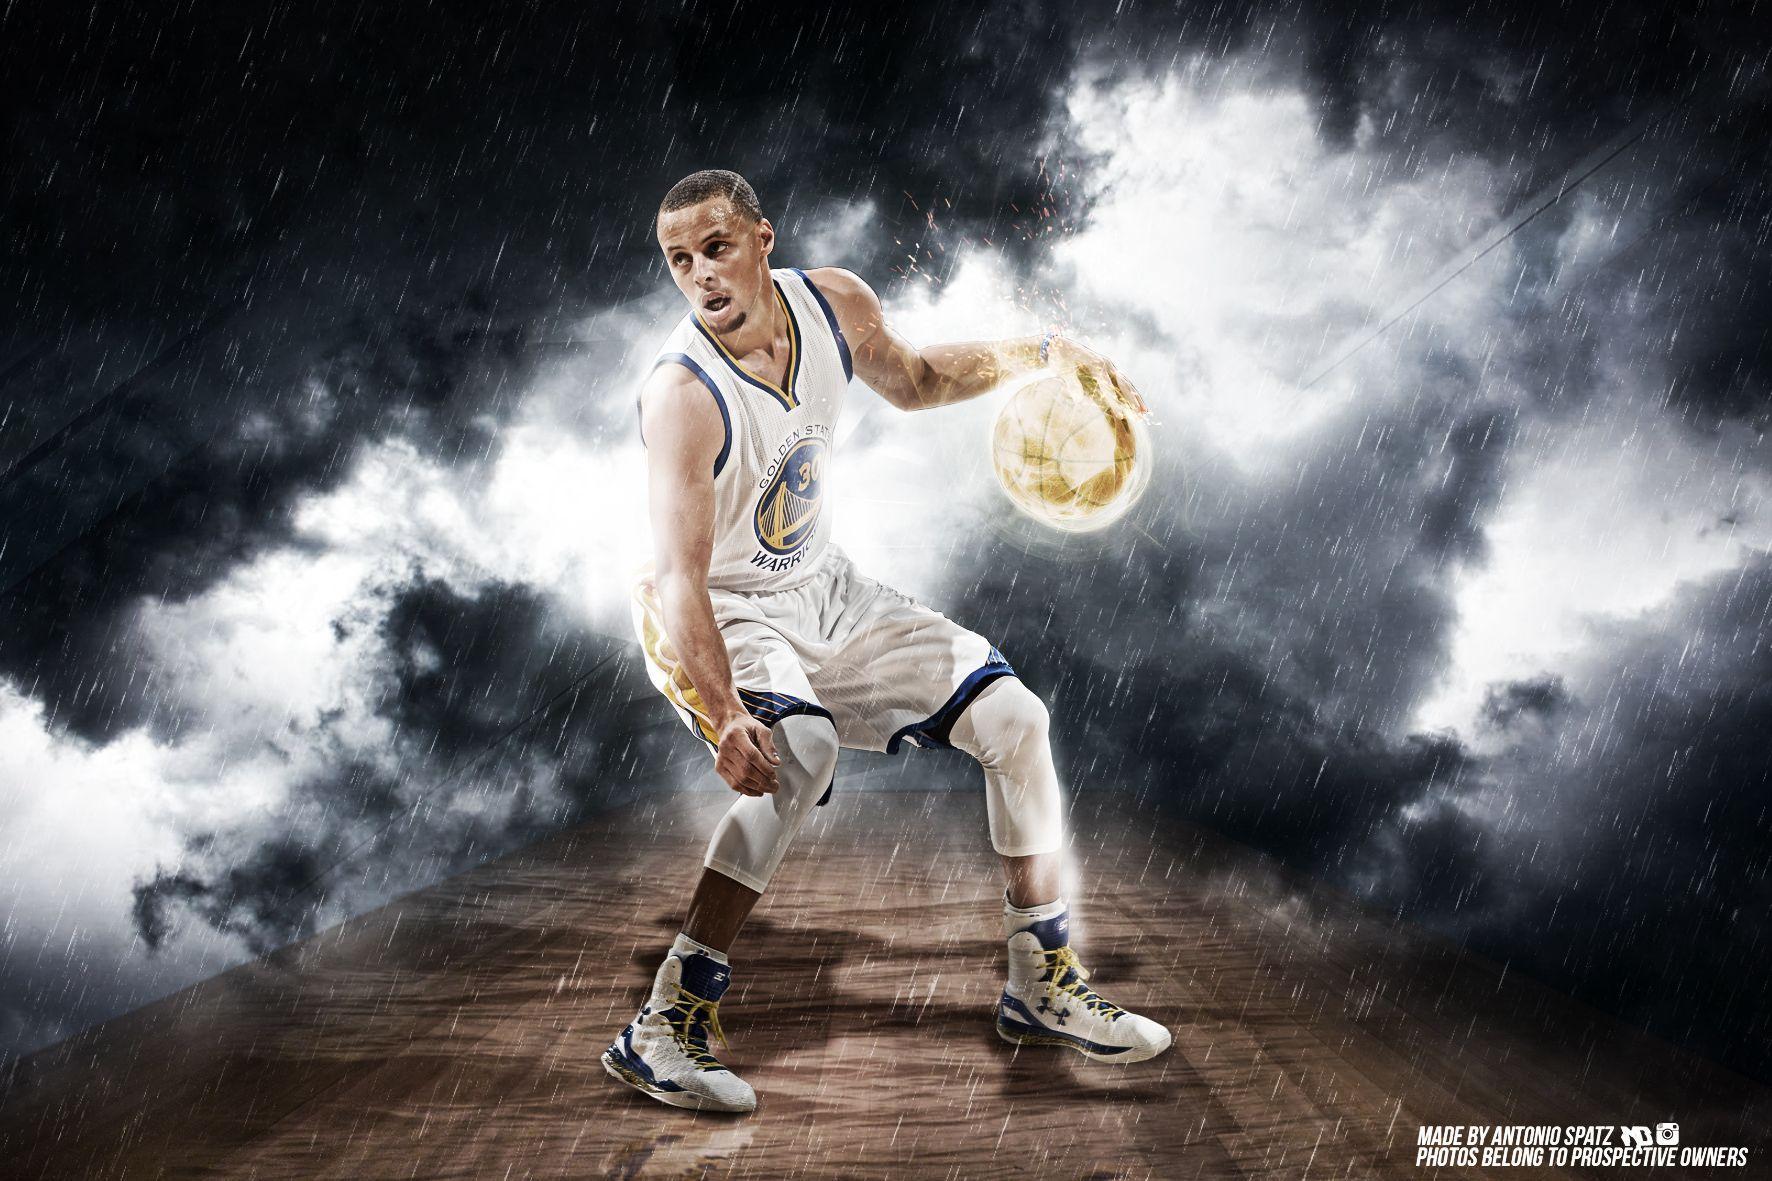 image about Stephen curry. Stephen curry